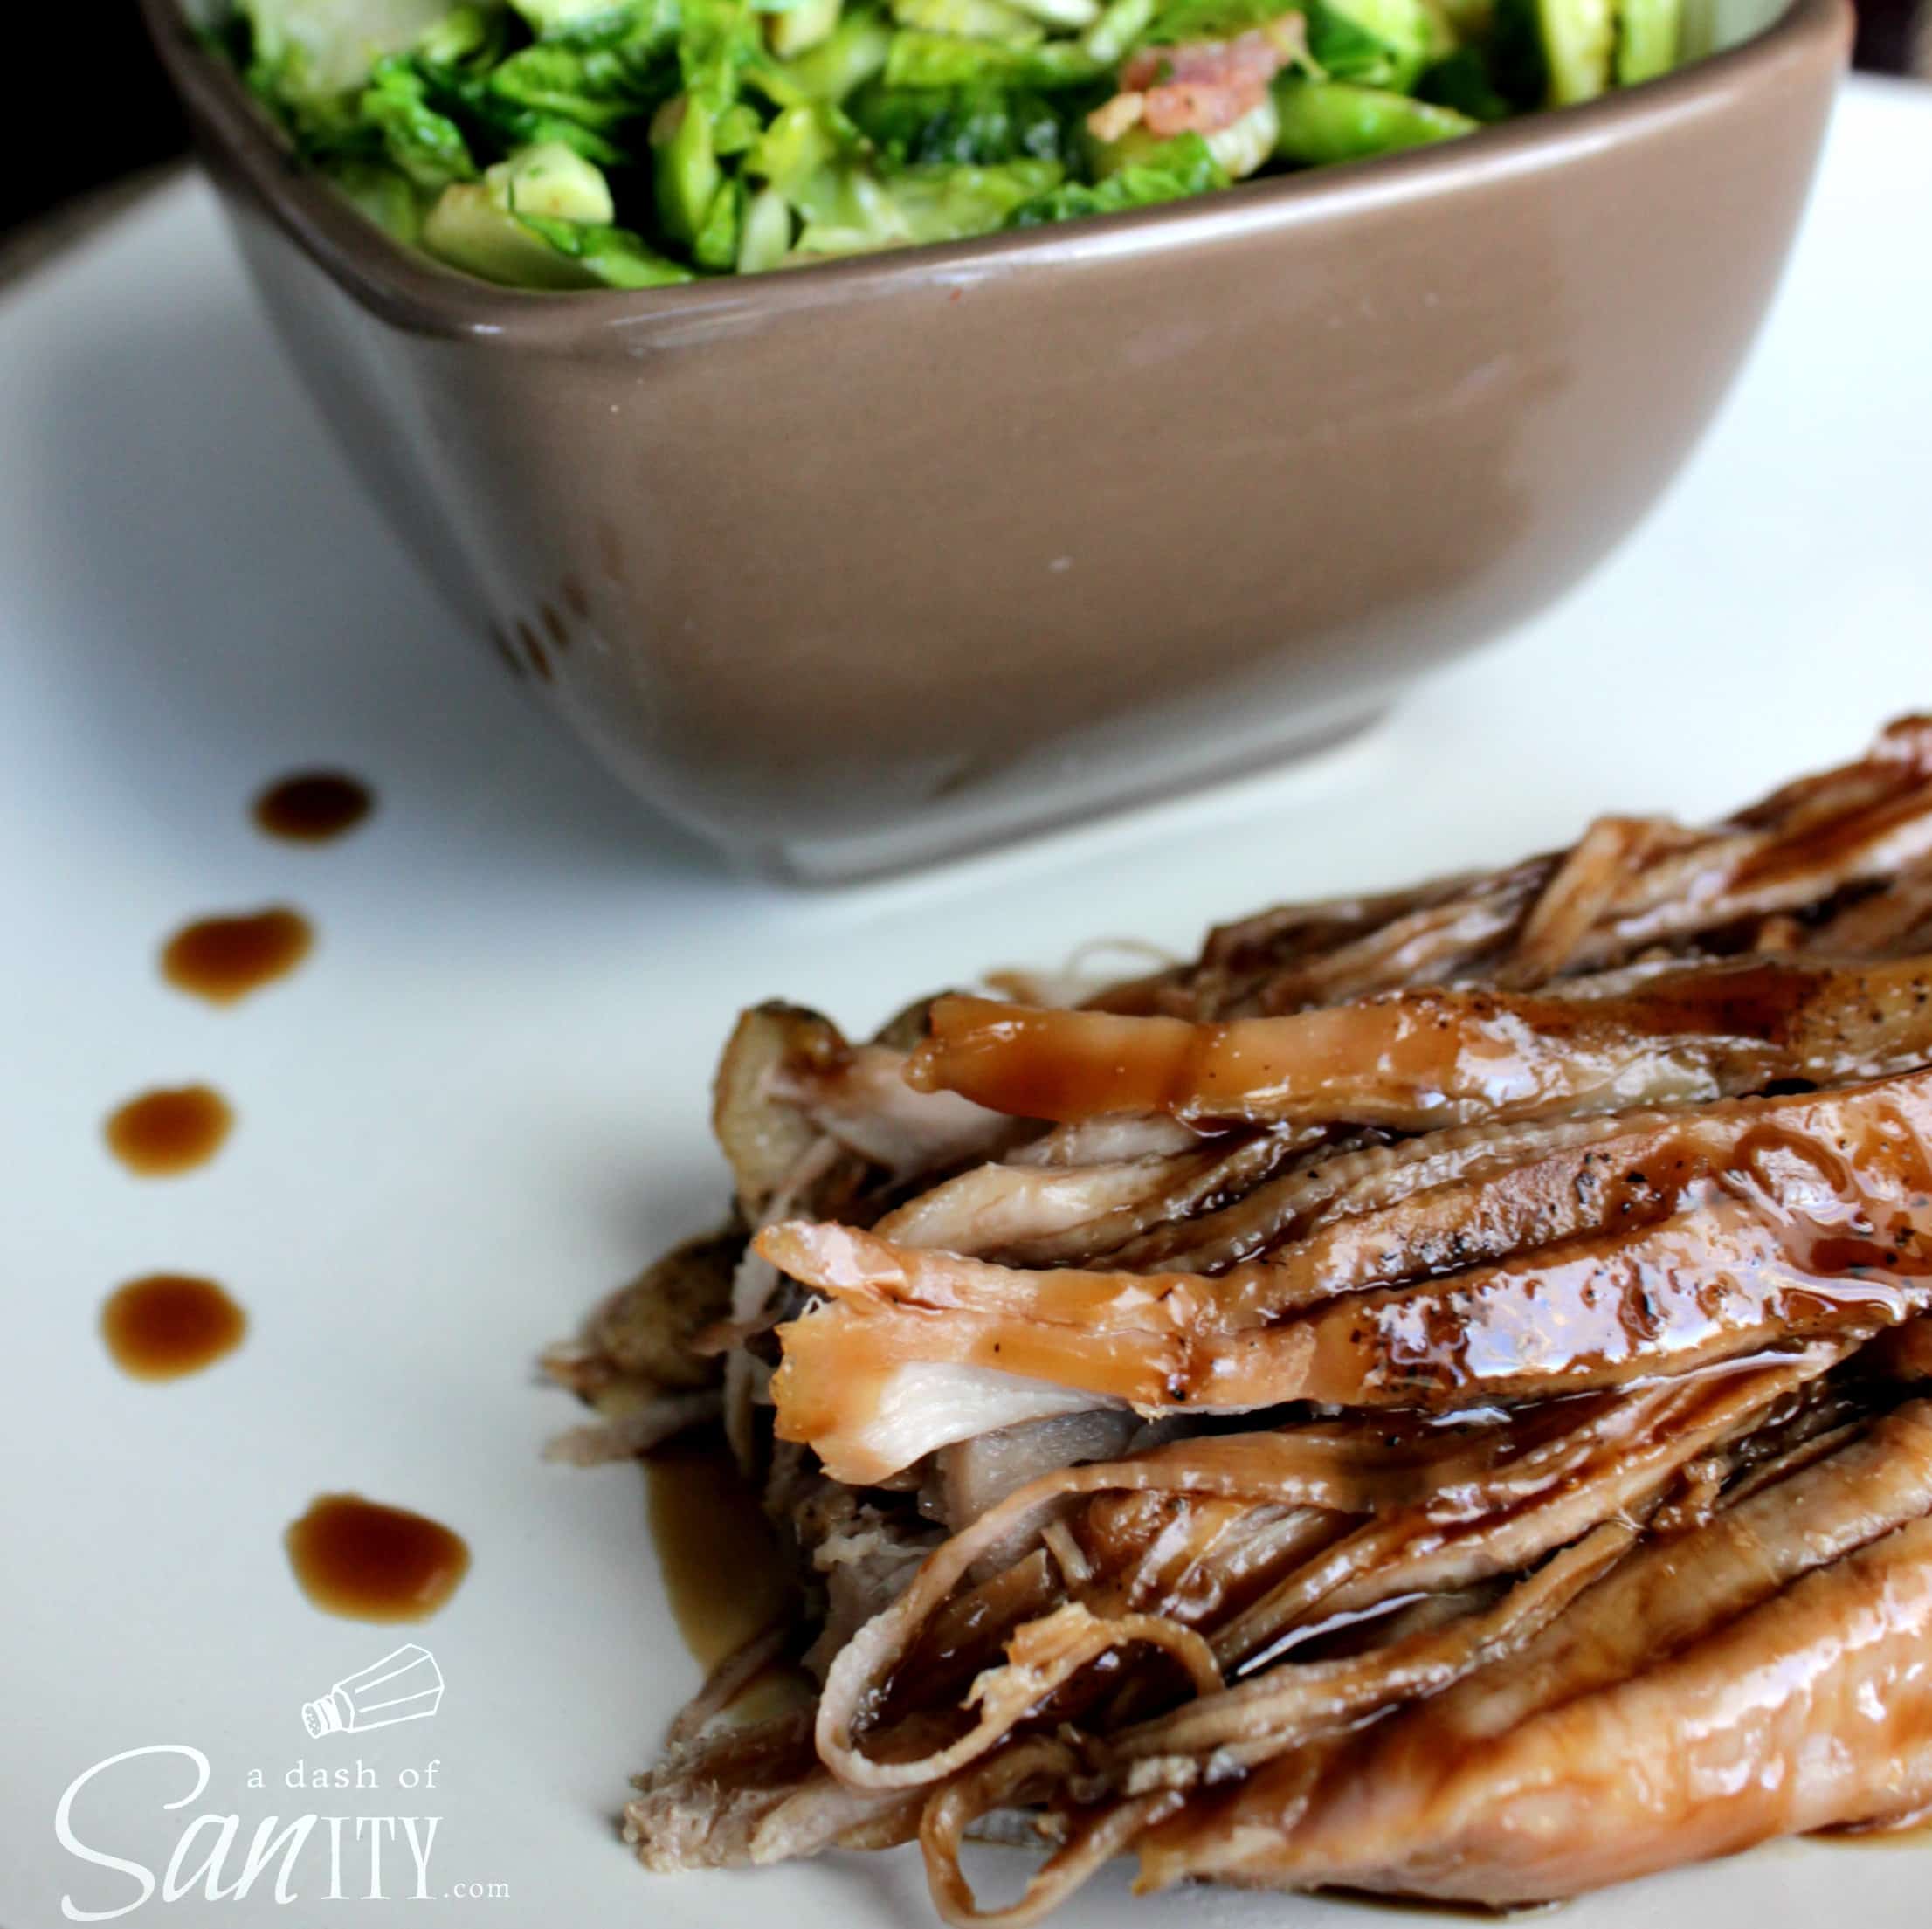 Brown Sugar and Balsamic Glazed Pork Loin served on a plate with a bowl of greens